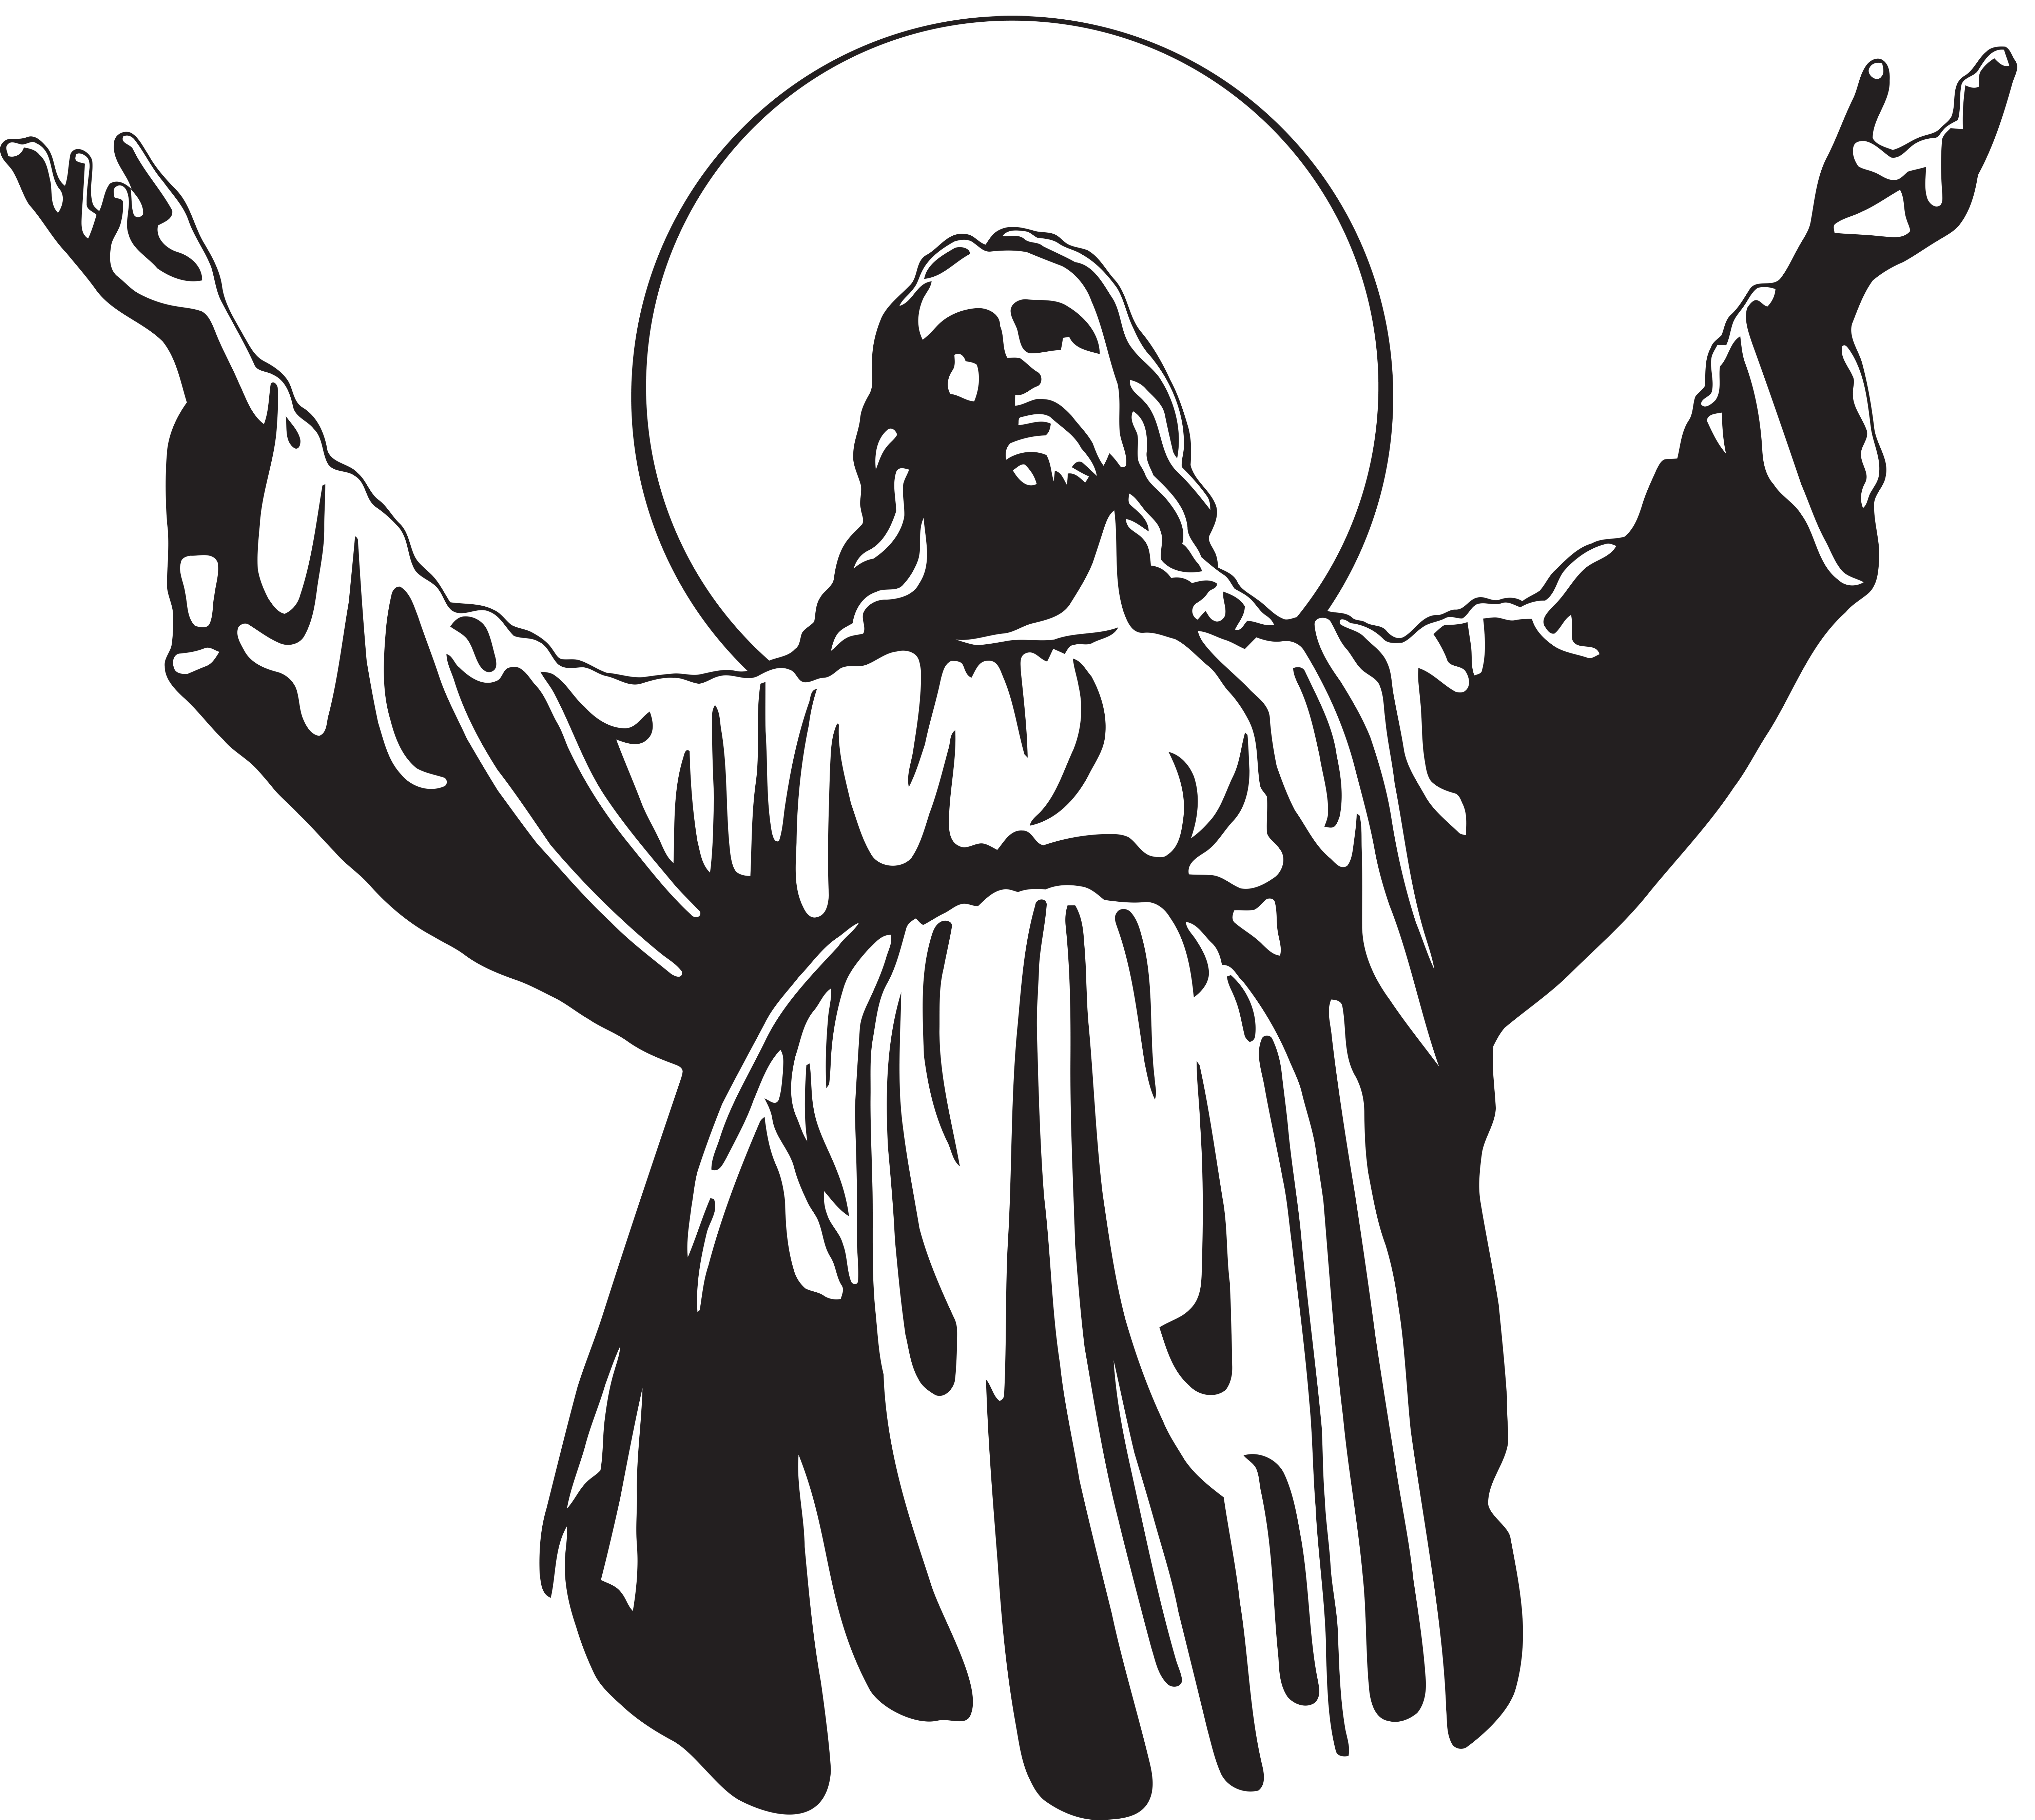 Ascension clipart jesus swirl clipart images gallery for.